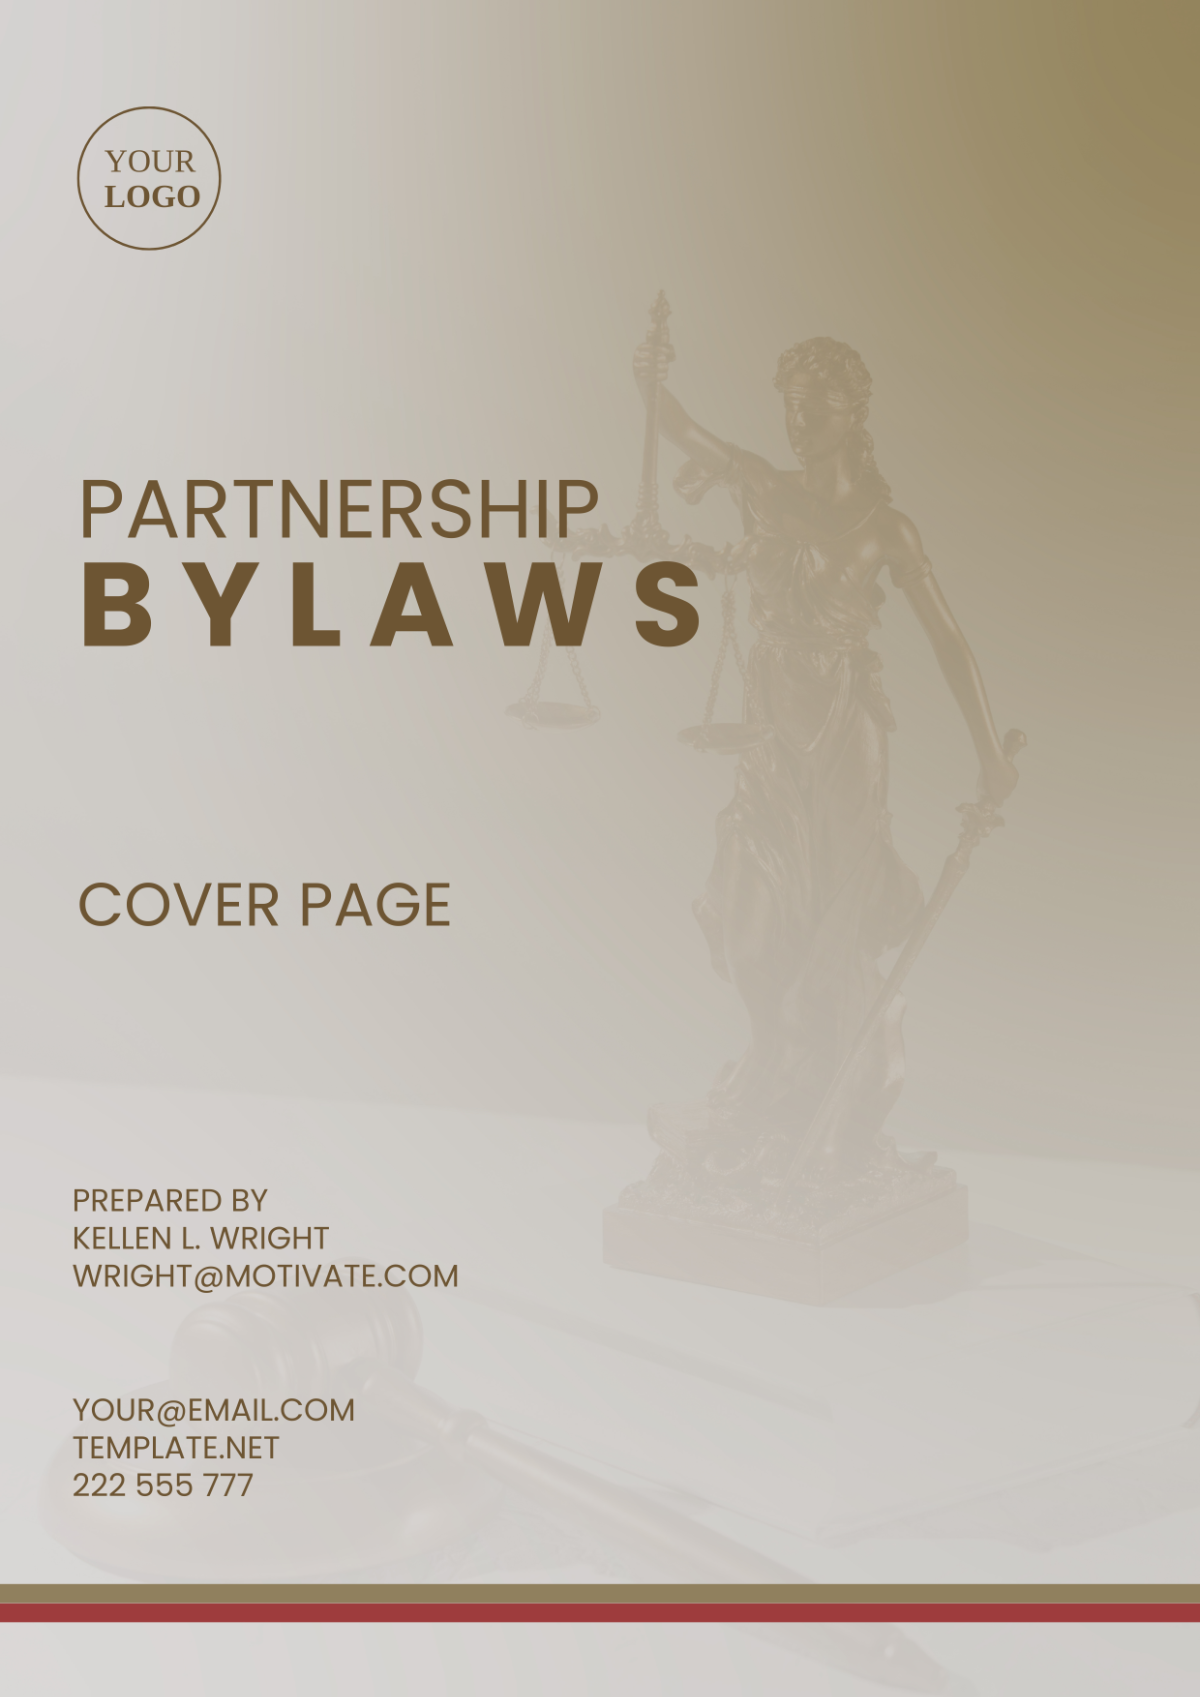 Partnership Bylaws Cover Page Template